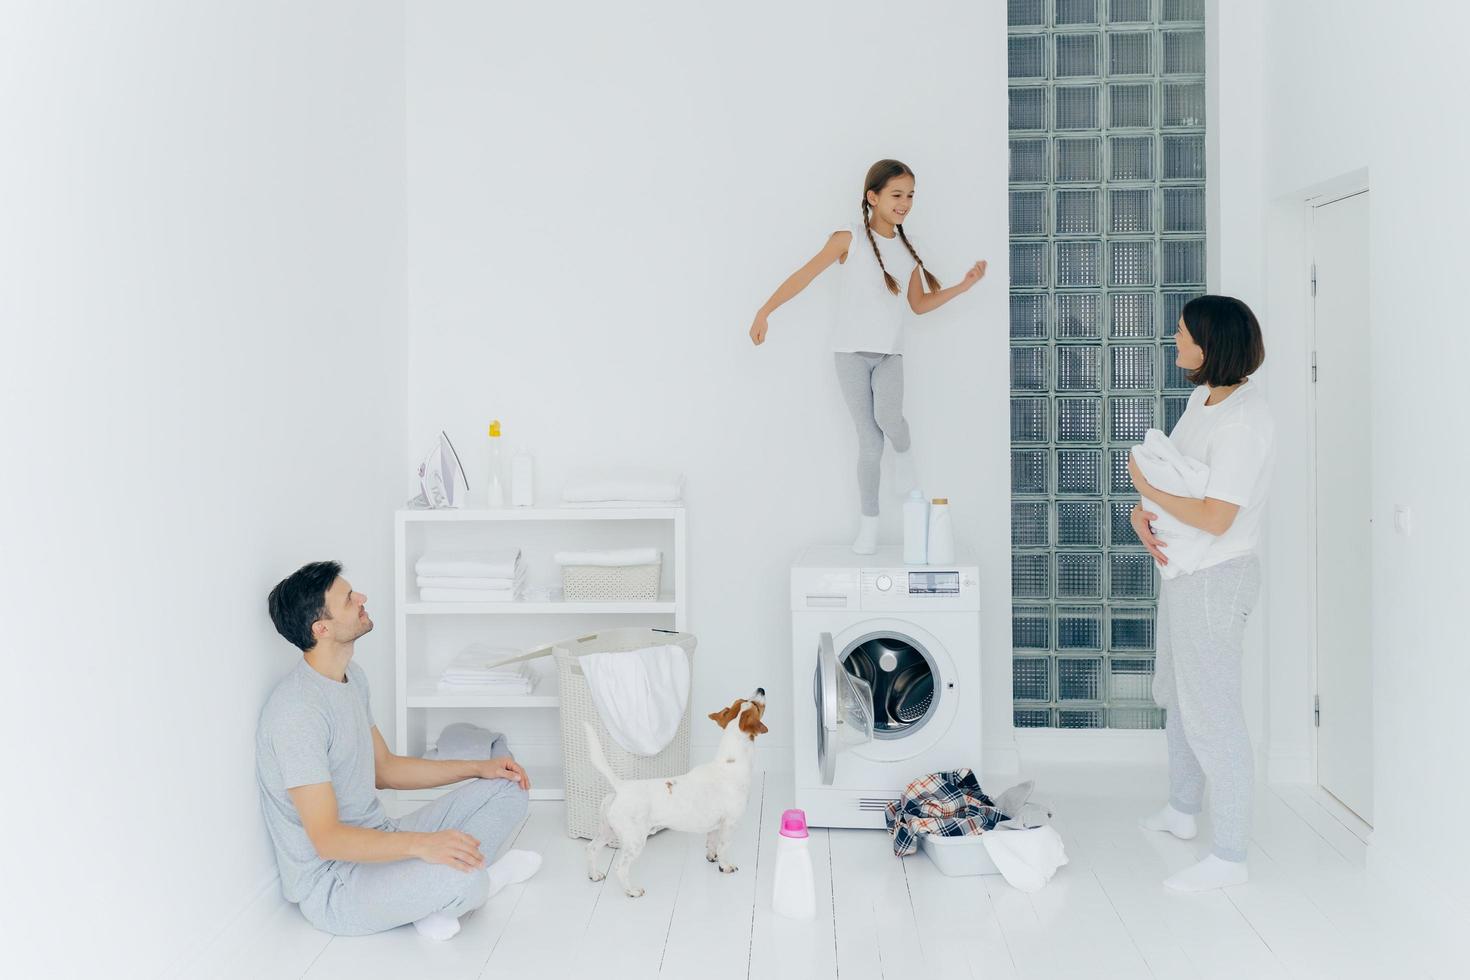 Happy family do laundry at home, father sits on floor in lotus pose, mother stands with white towel, look at child who dances happily on washing machine, pedigree dog near. Household chores. photo